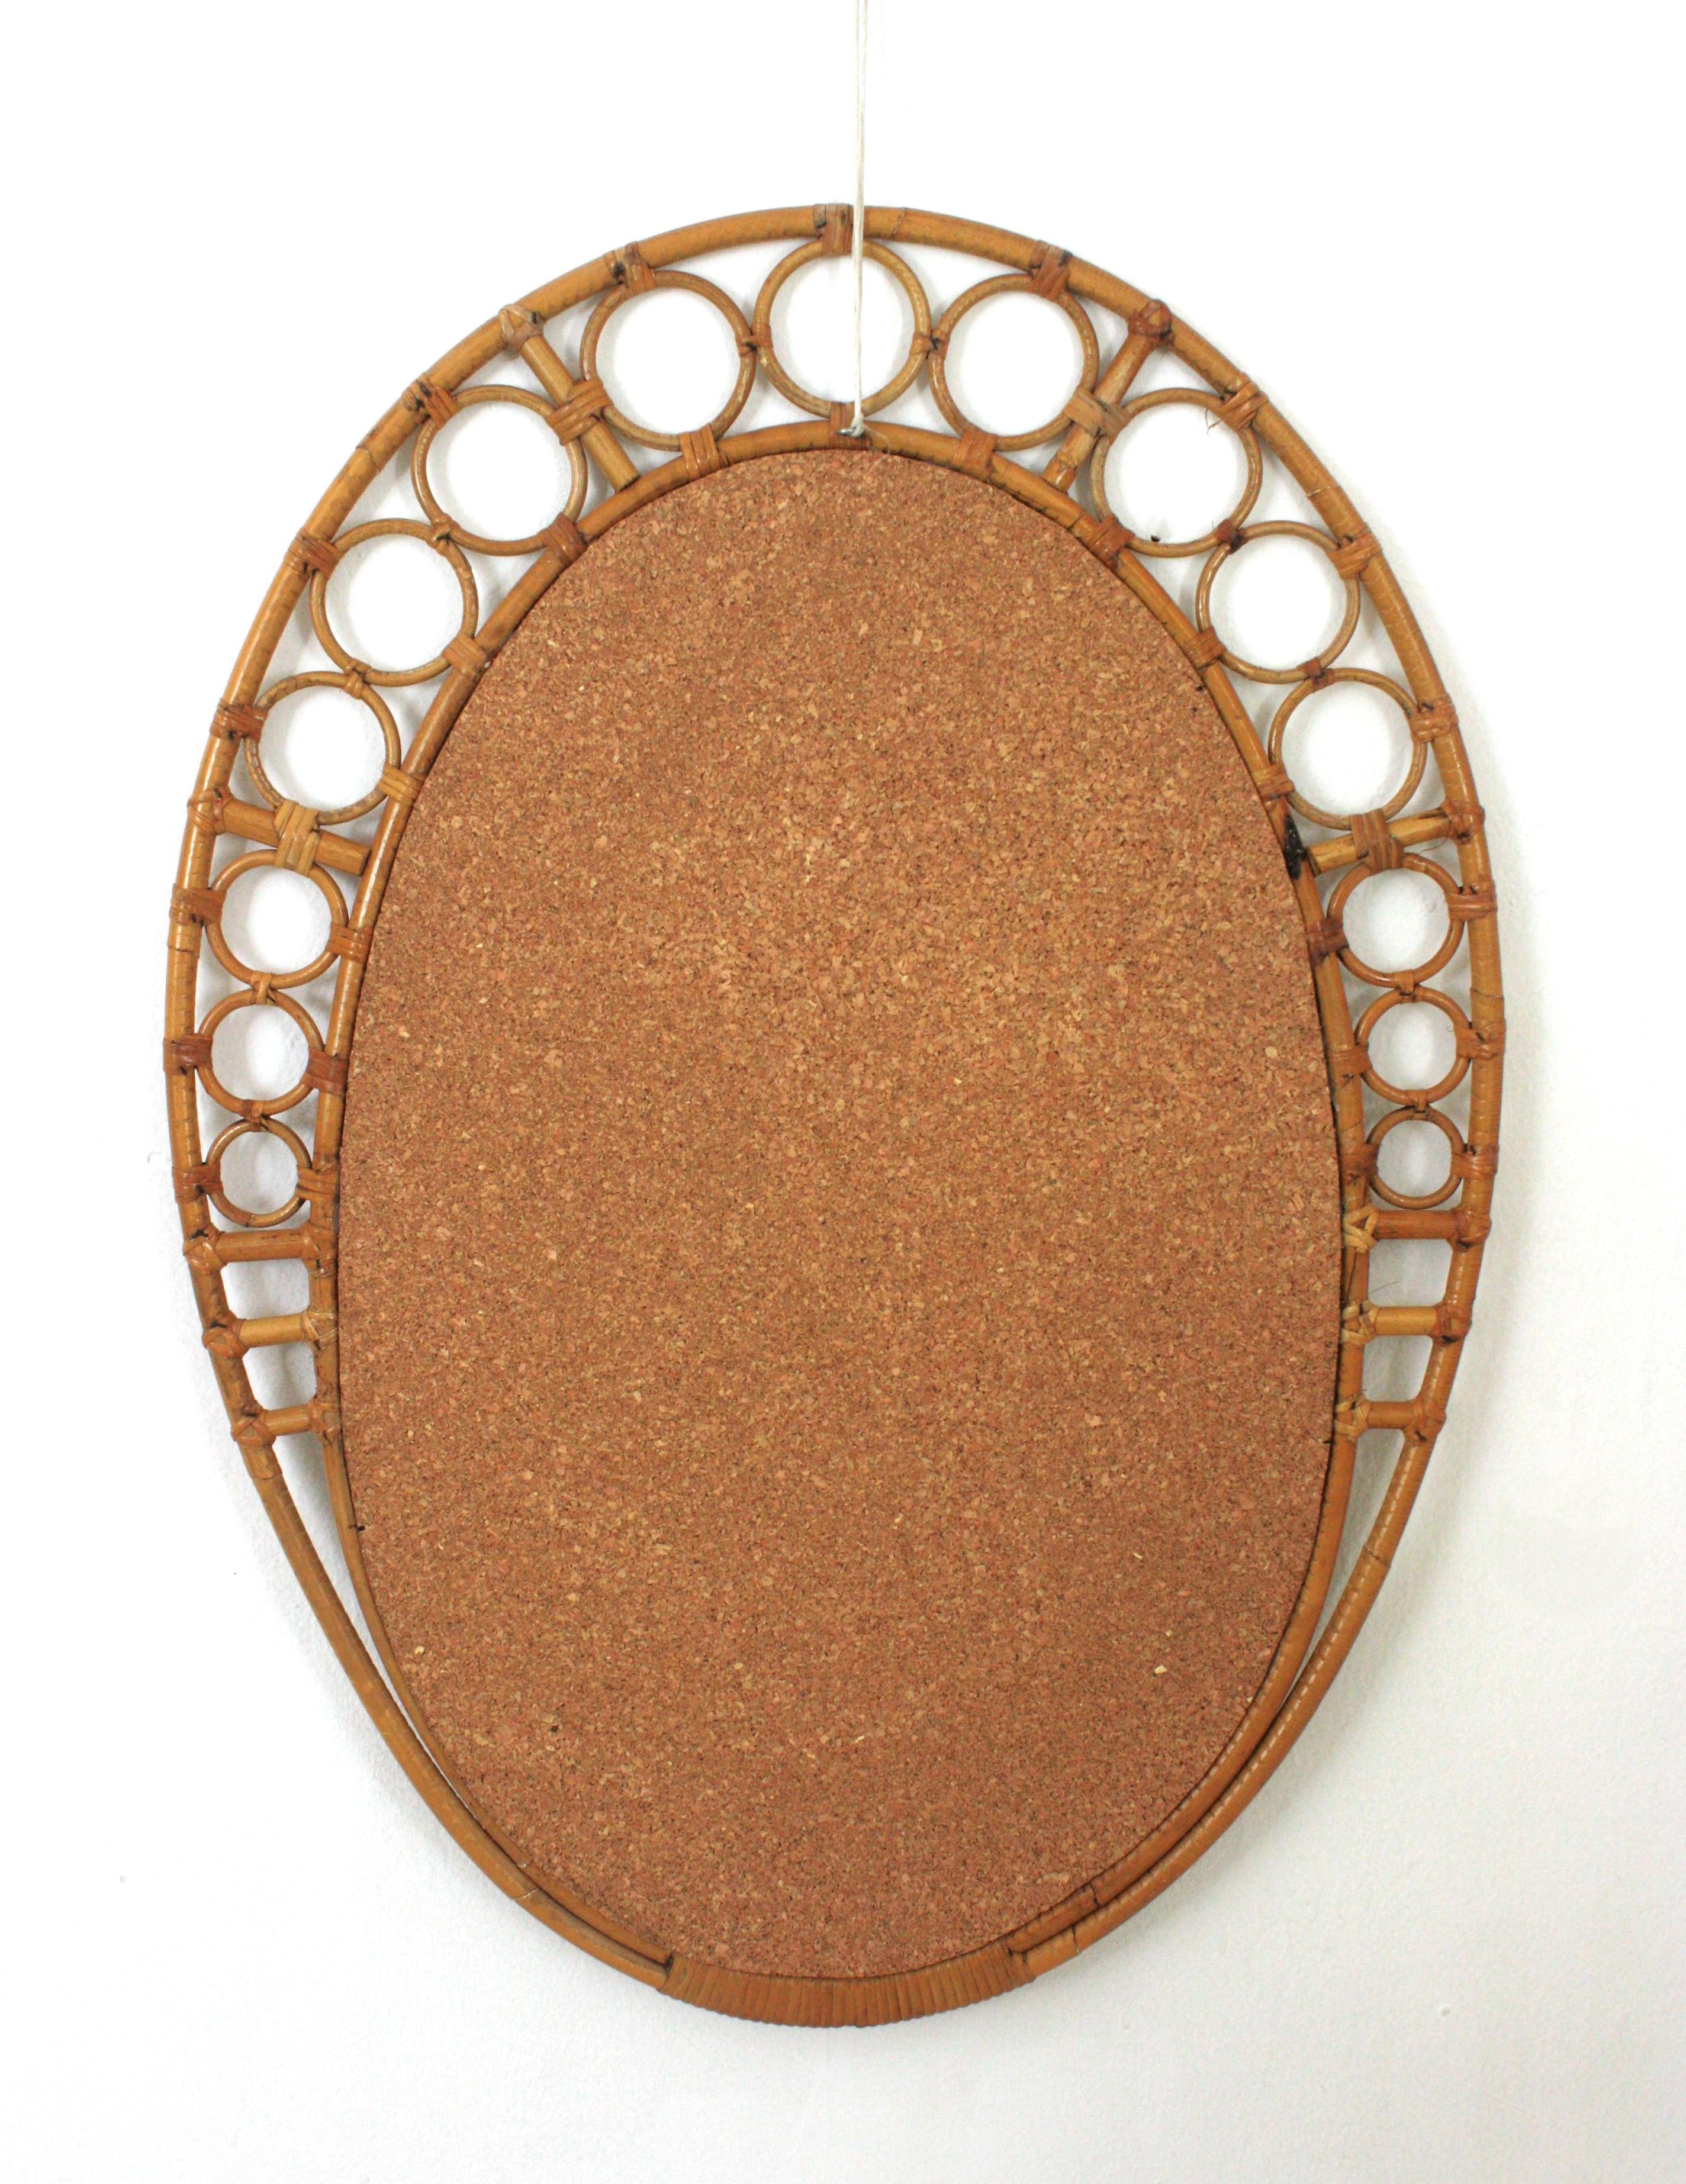 Bamboo Rattan Oval Mirror with Rings Frame, 1960s For Sale 2